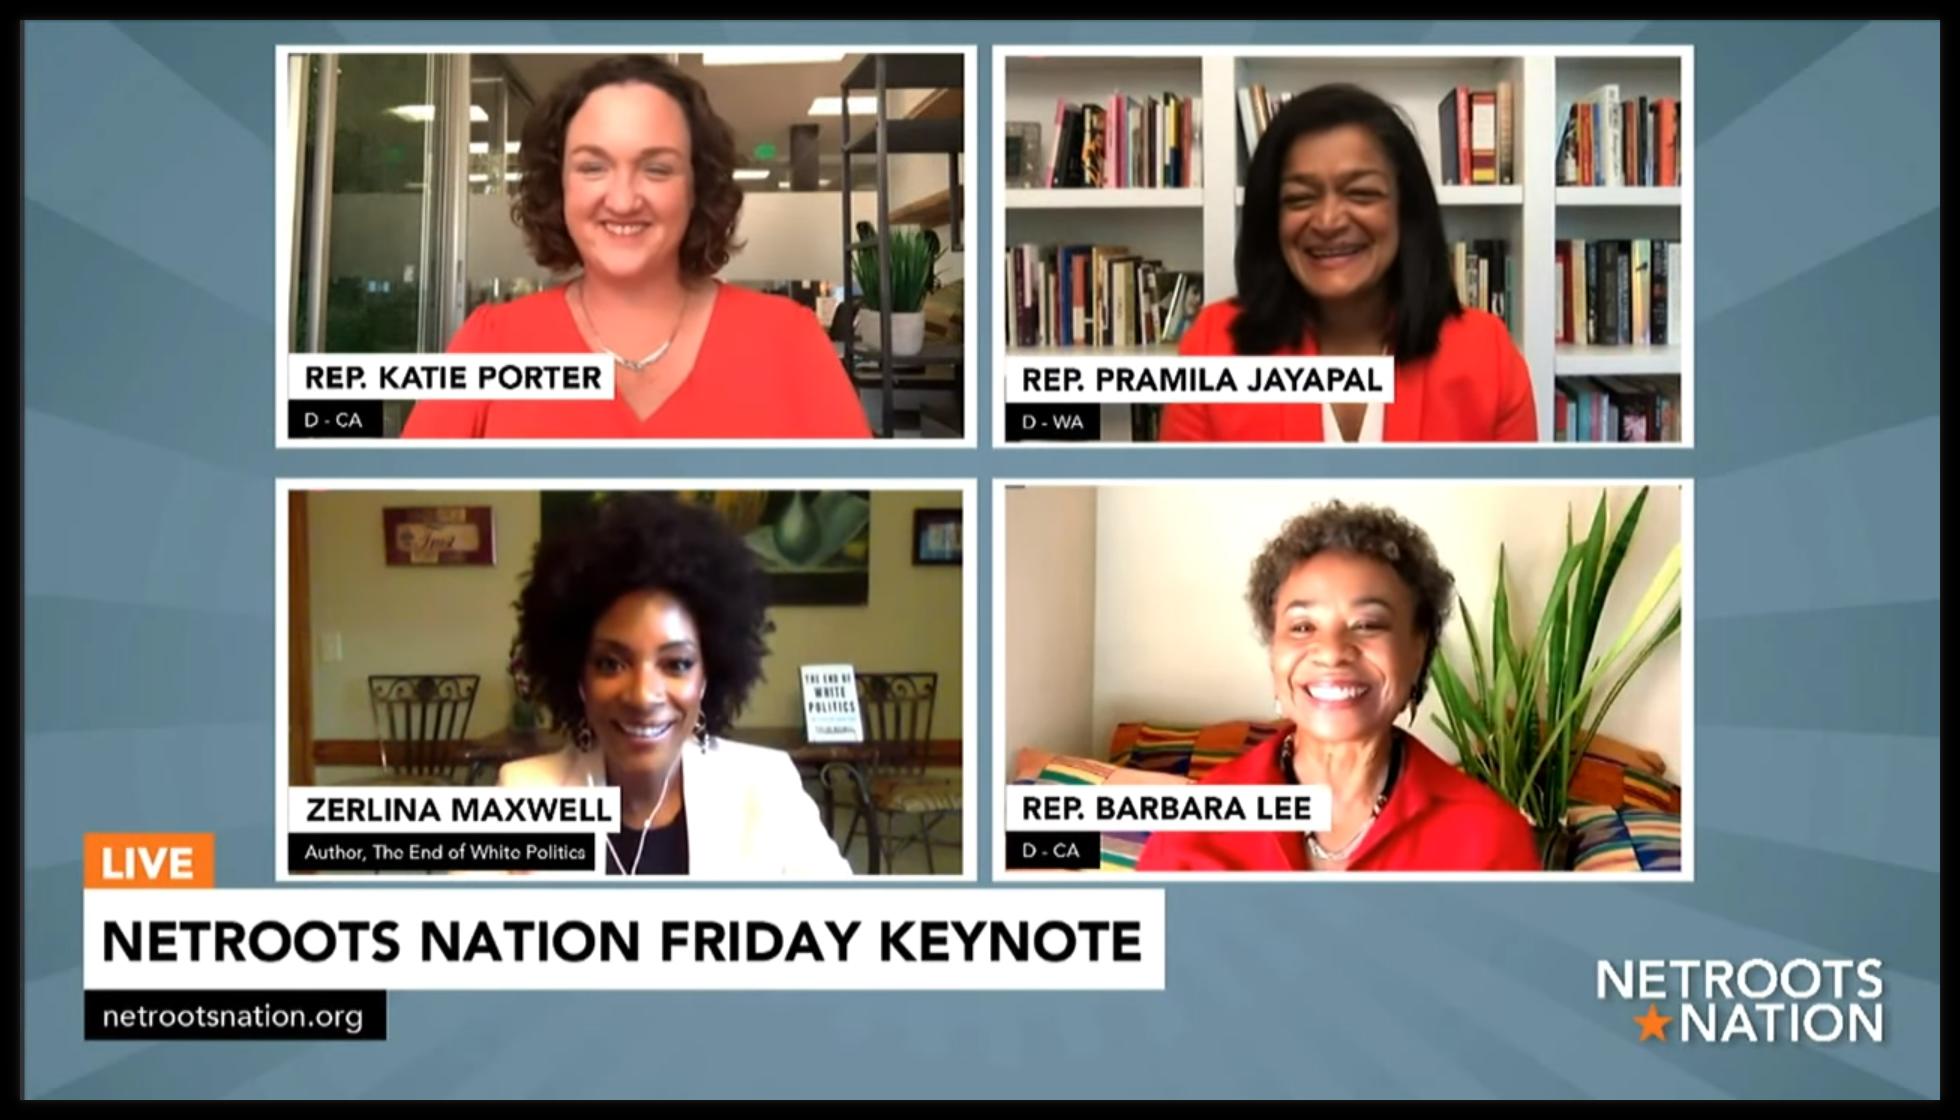 Netroots Nation 2020 Friday keynote speakers